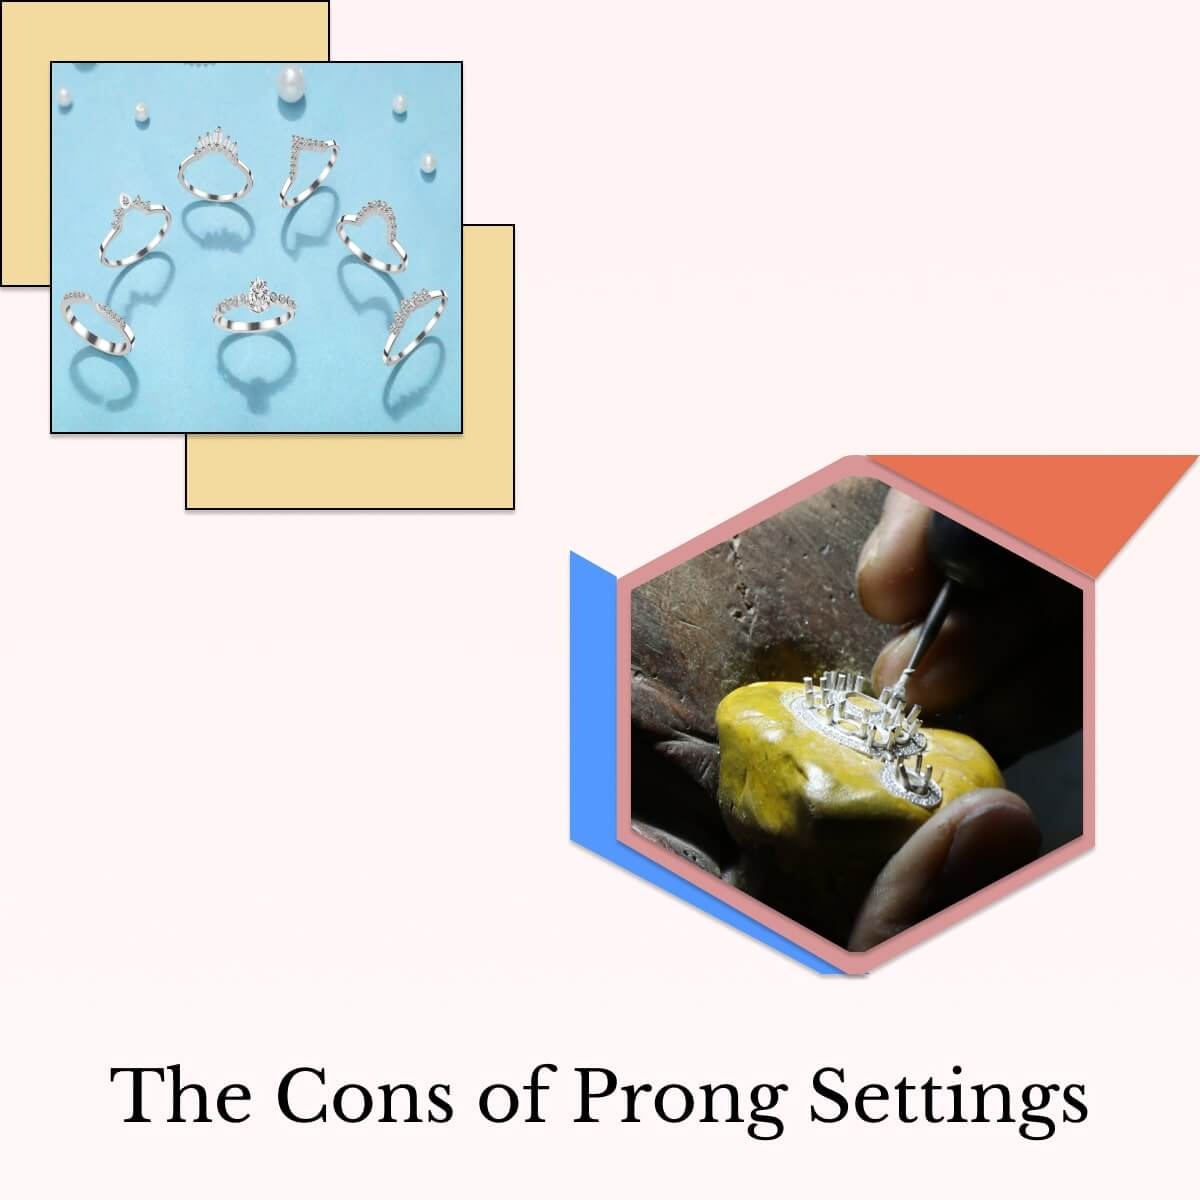 Disadvantages of Prong settings